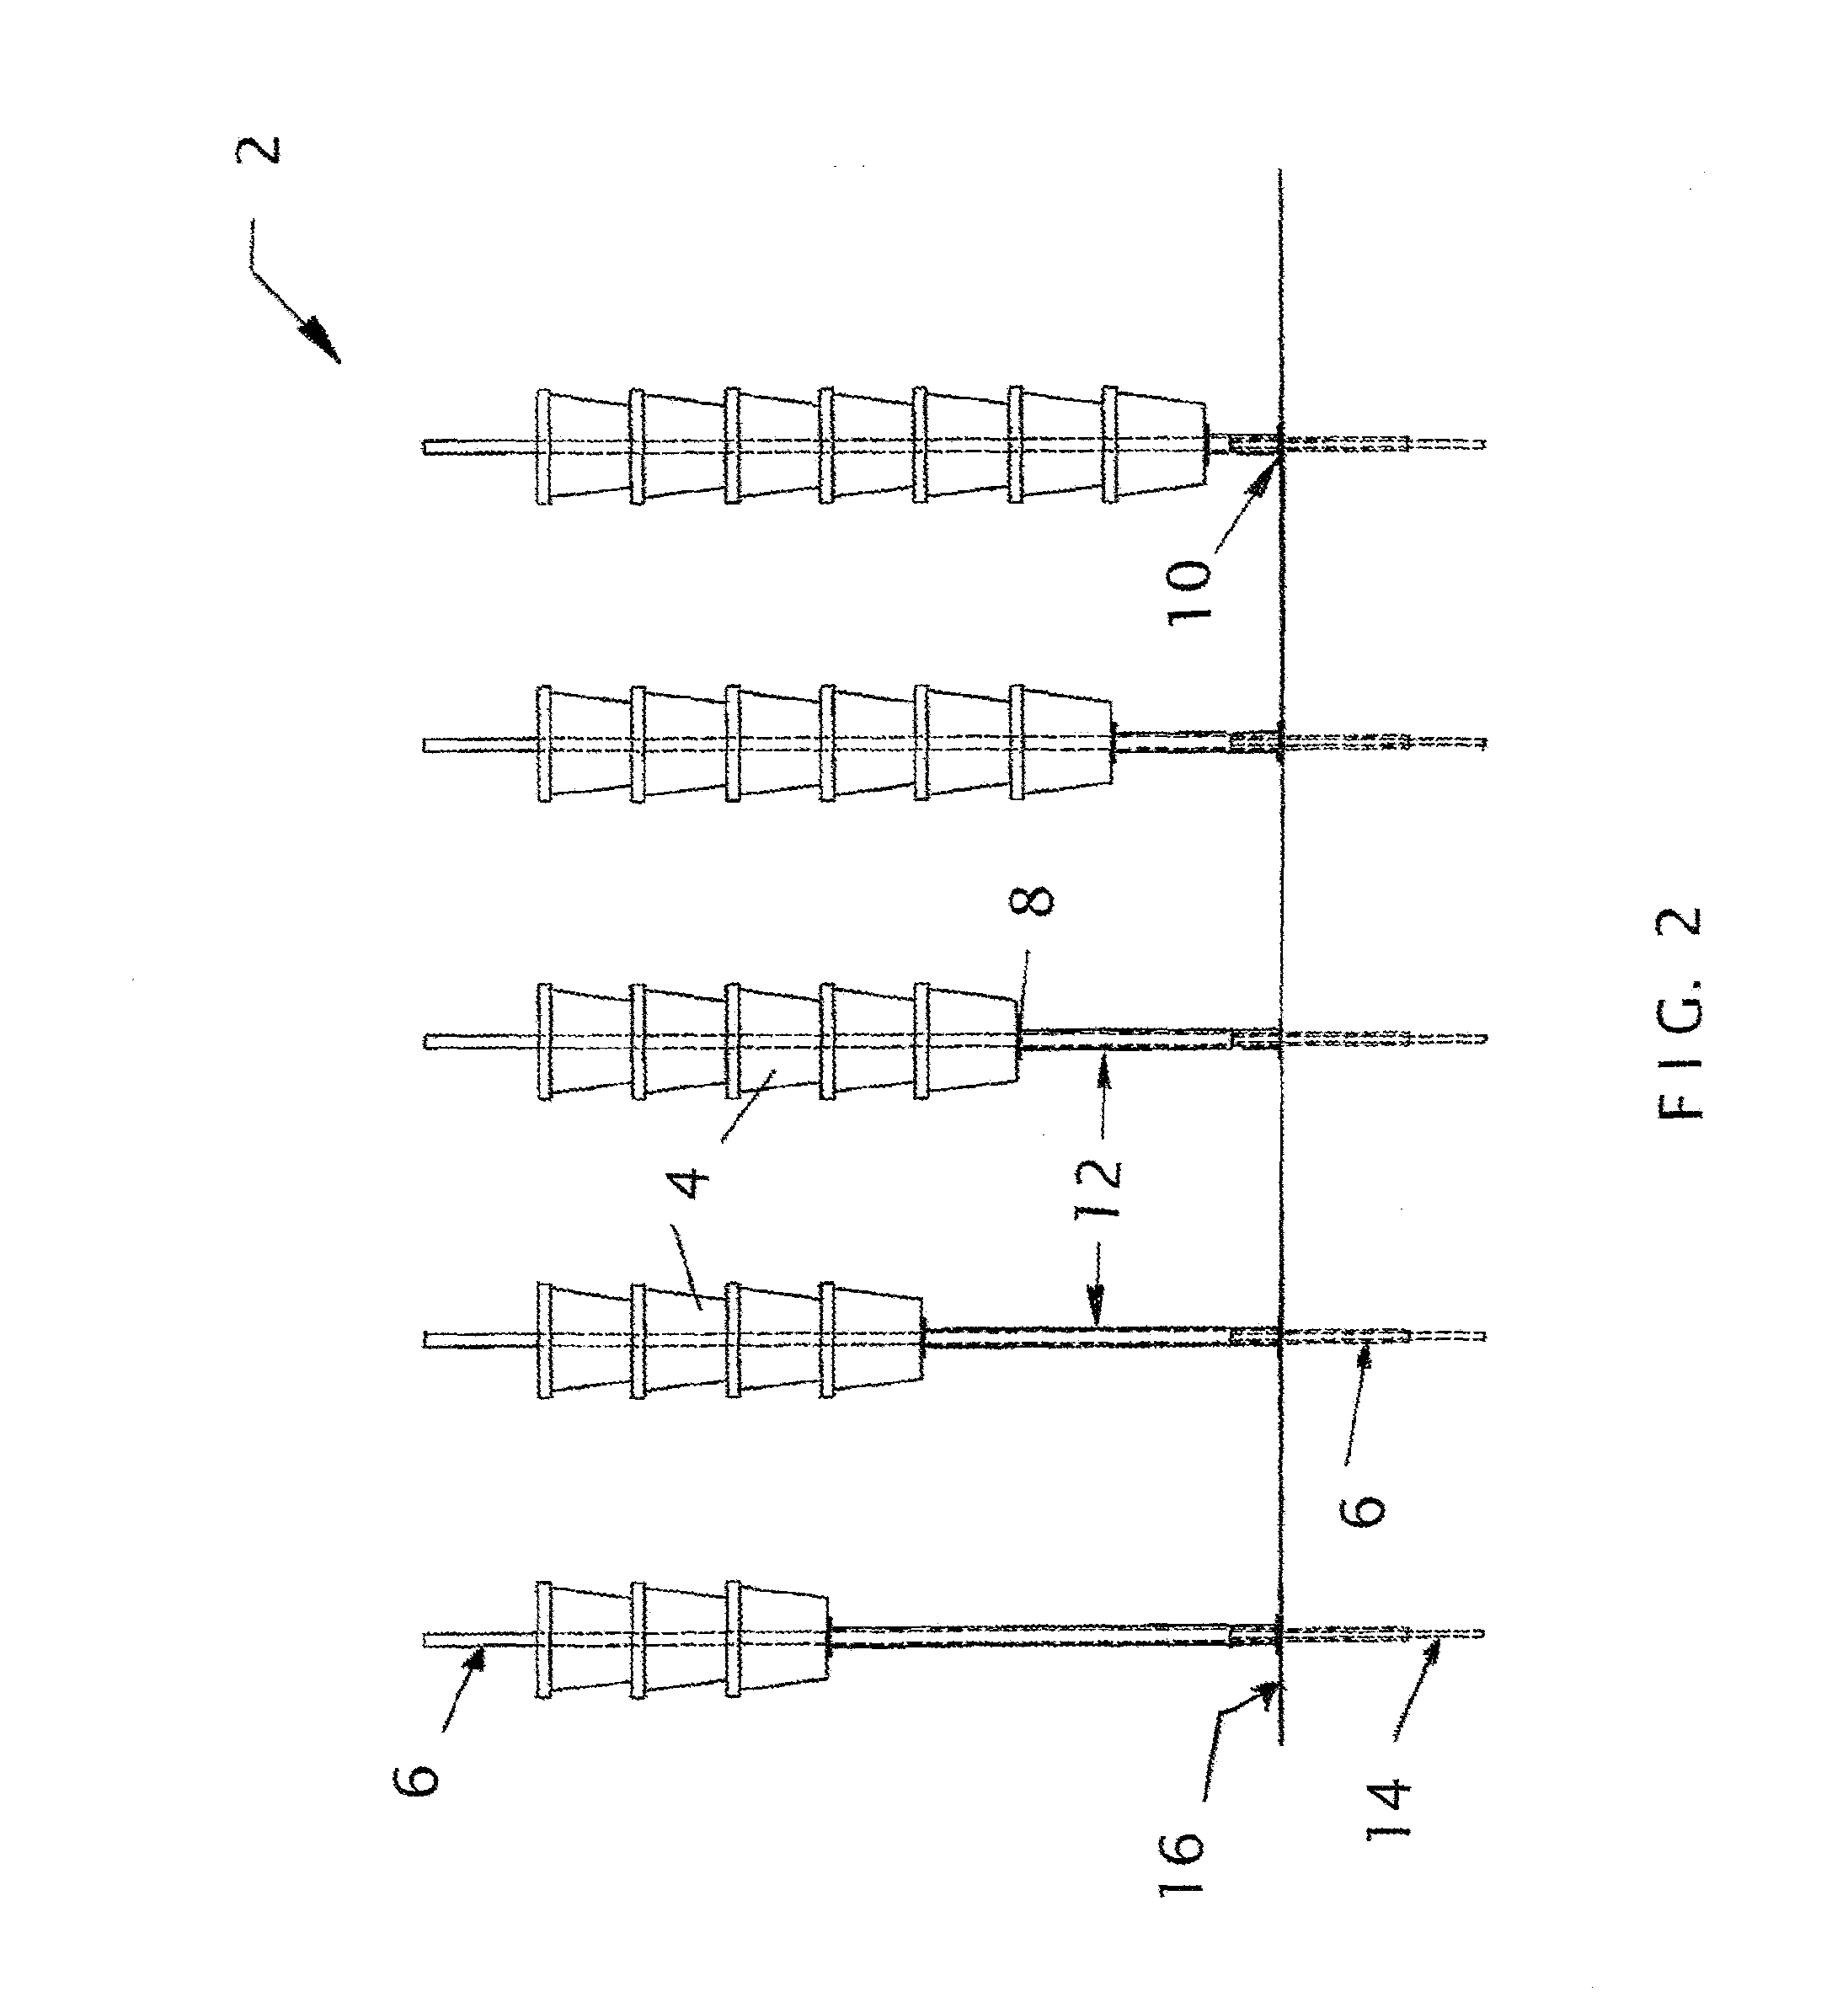 Tower Planter Growth Arrangement and Method